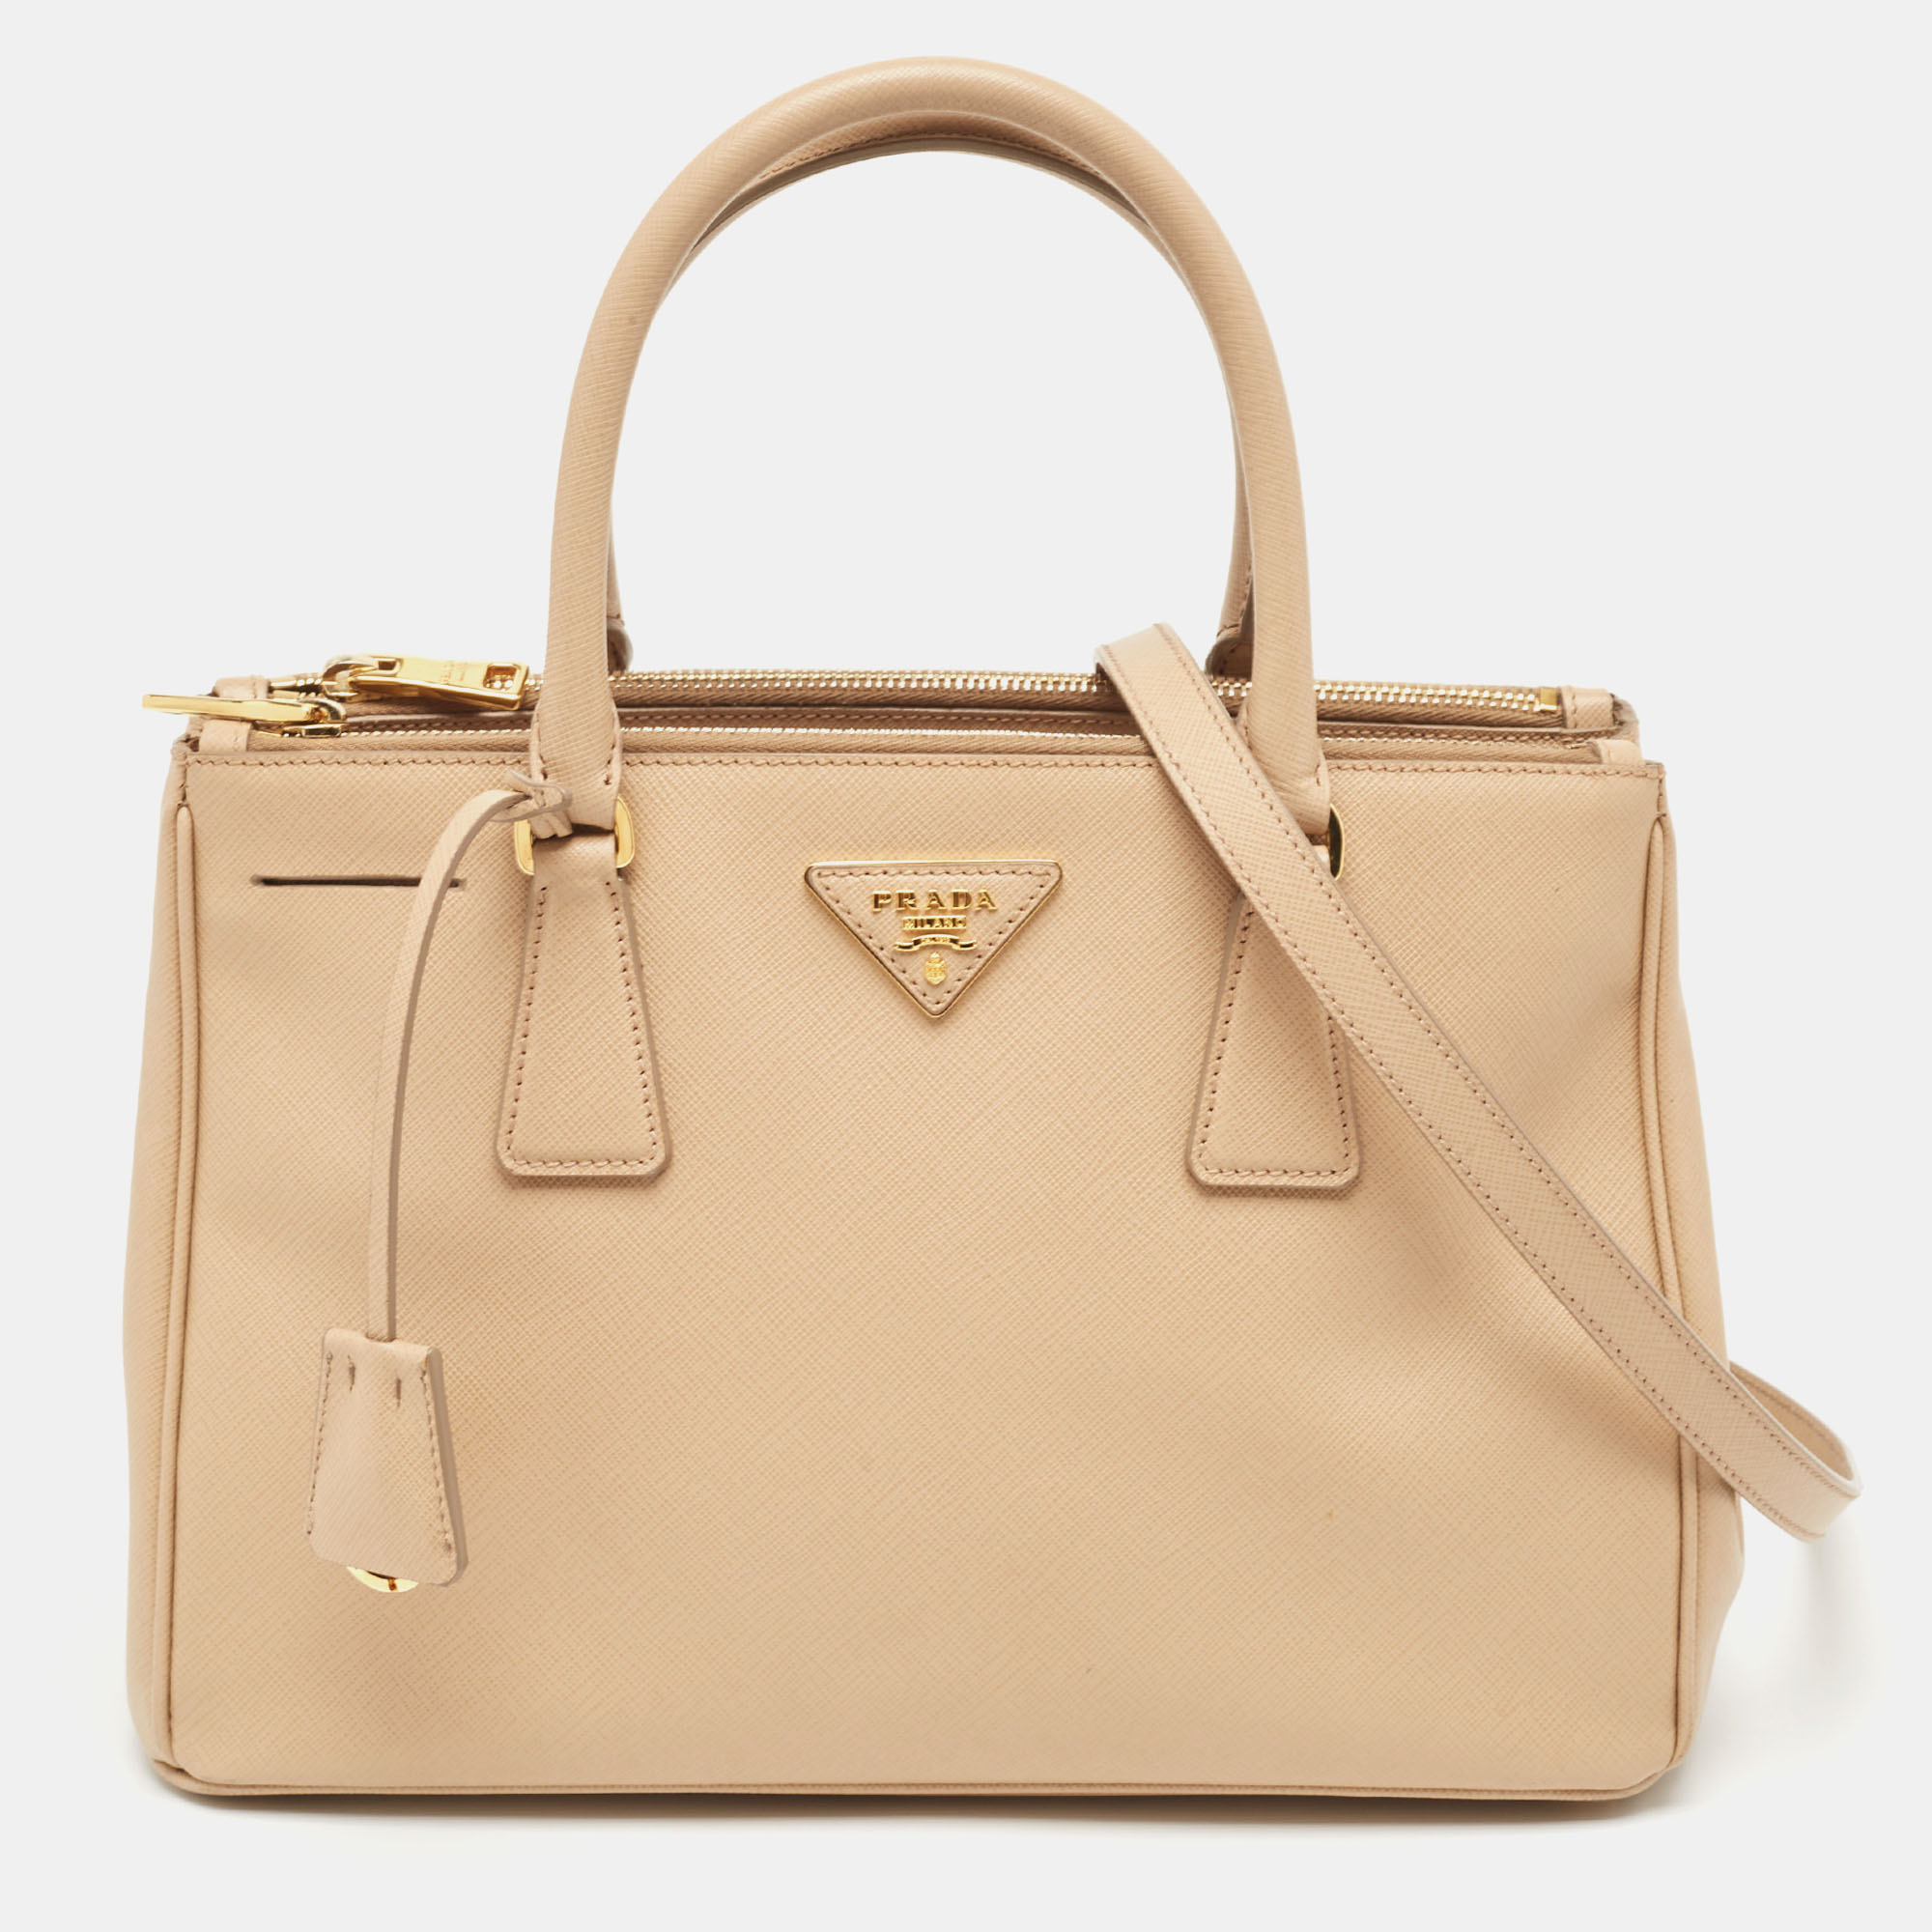 Thoughtful details high quality and everyday convenience mark this designer bag for women by Prada. The bag is sewn with skill to deliver a refined look and an impeccable finish.